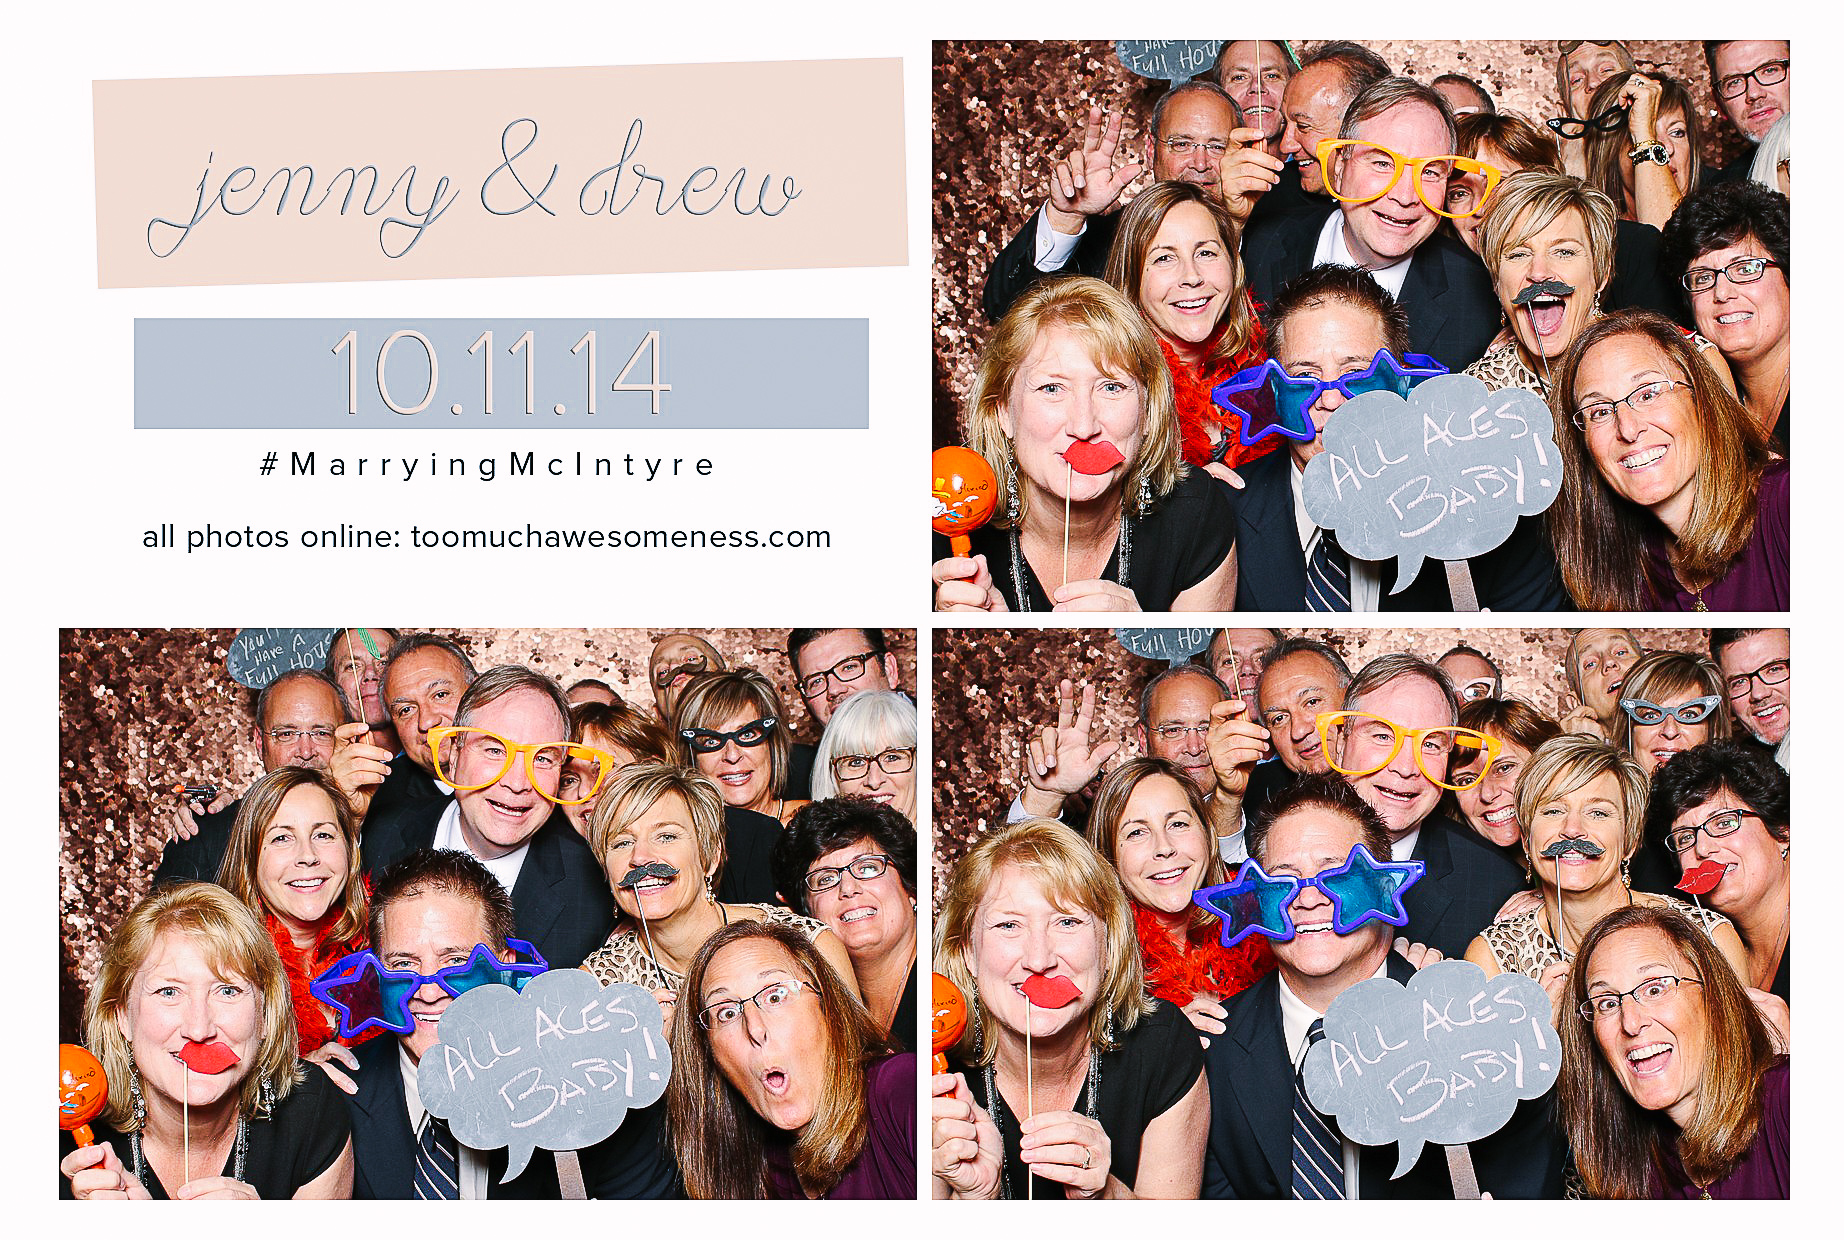 00149-Photo Booth at The Westin Hotel Cleveland Jenny and Drew Wedding Photos-20141011.jpg